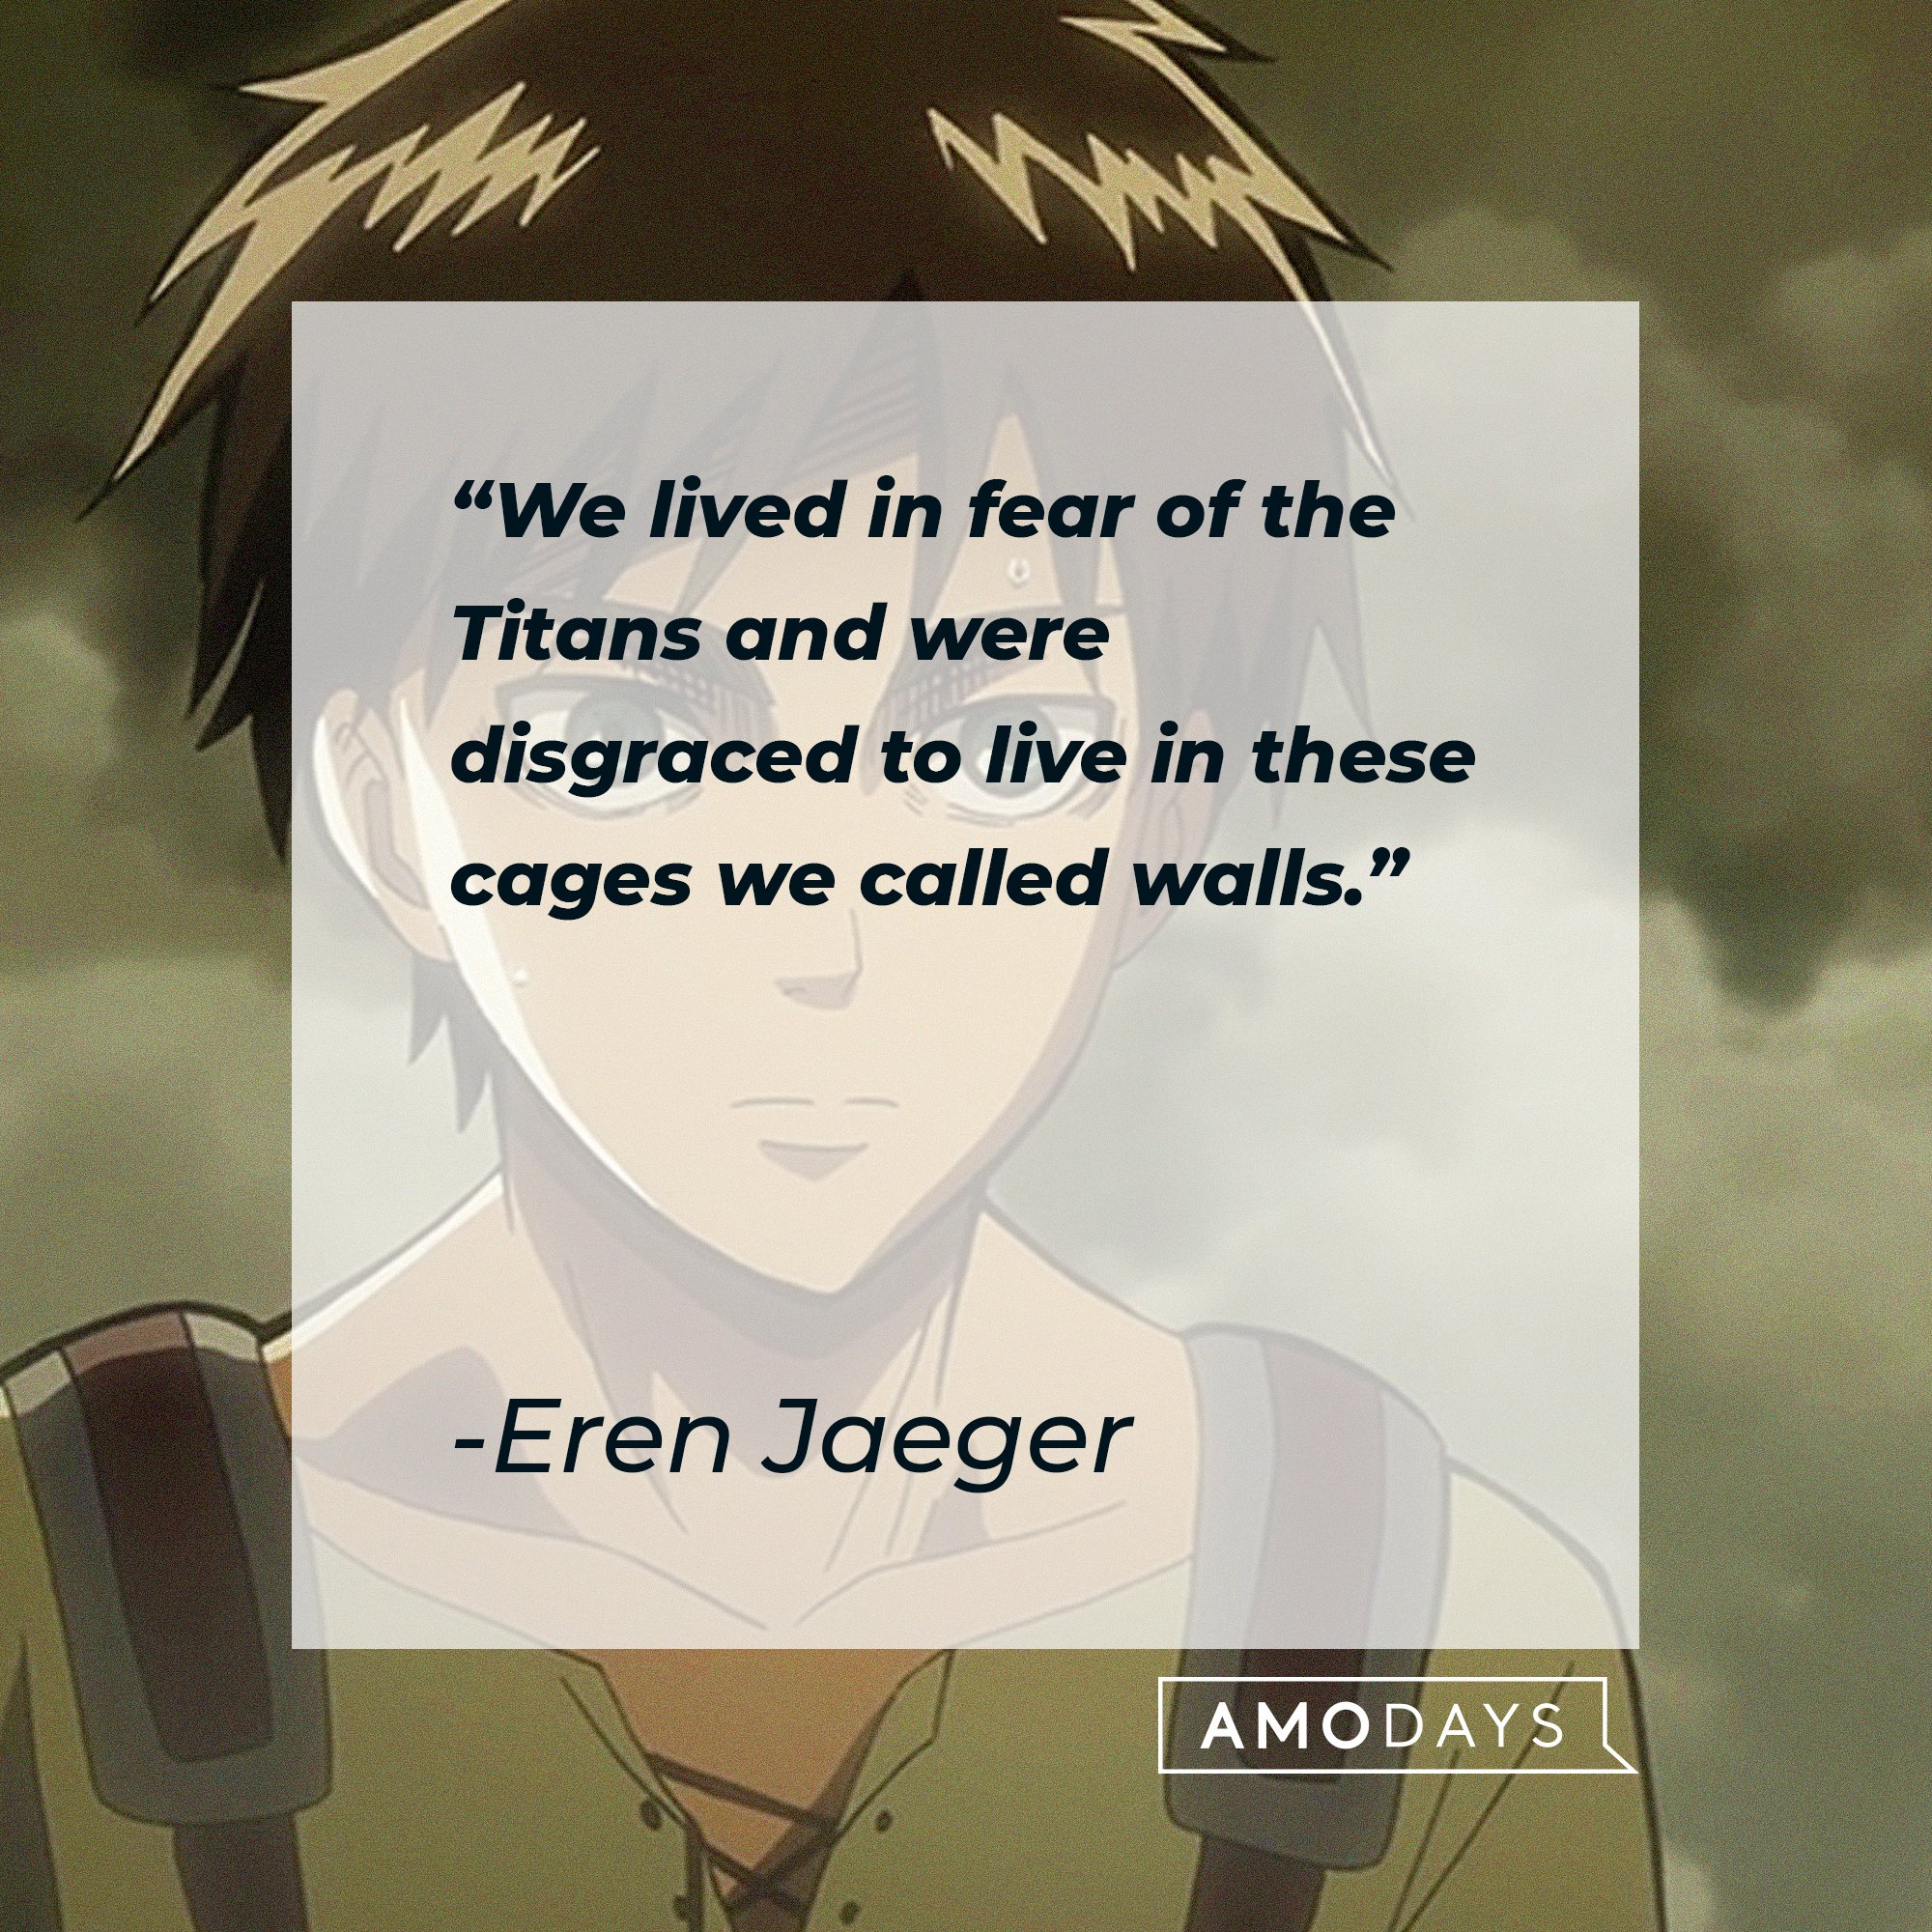 Eren Jaeger’s quote: "We lived in fear of the Titans and were disgraced to live in these cages we called walls." | Image: AmoDays